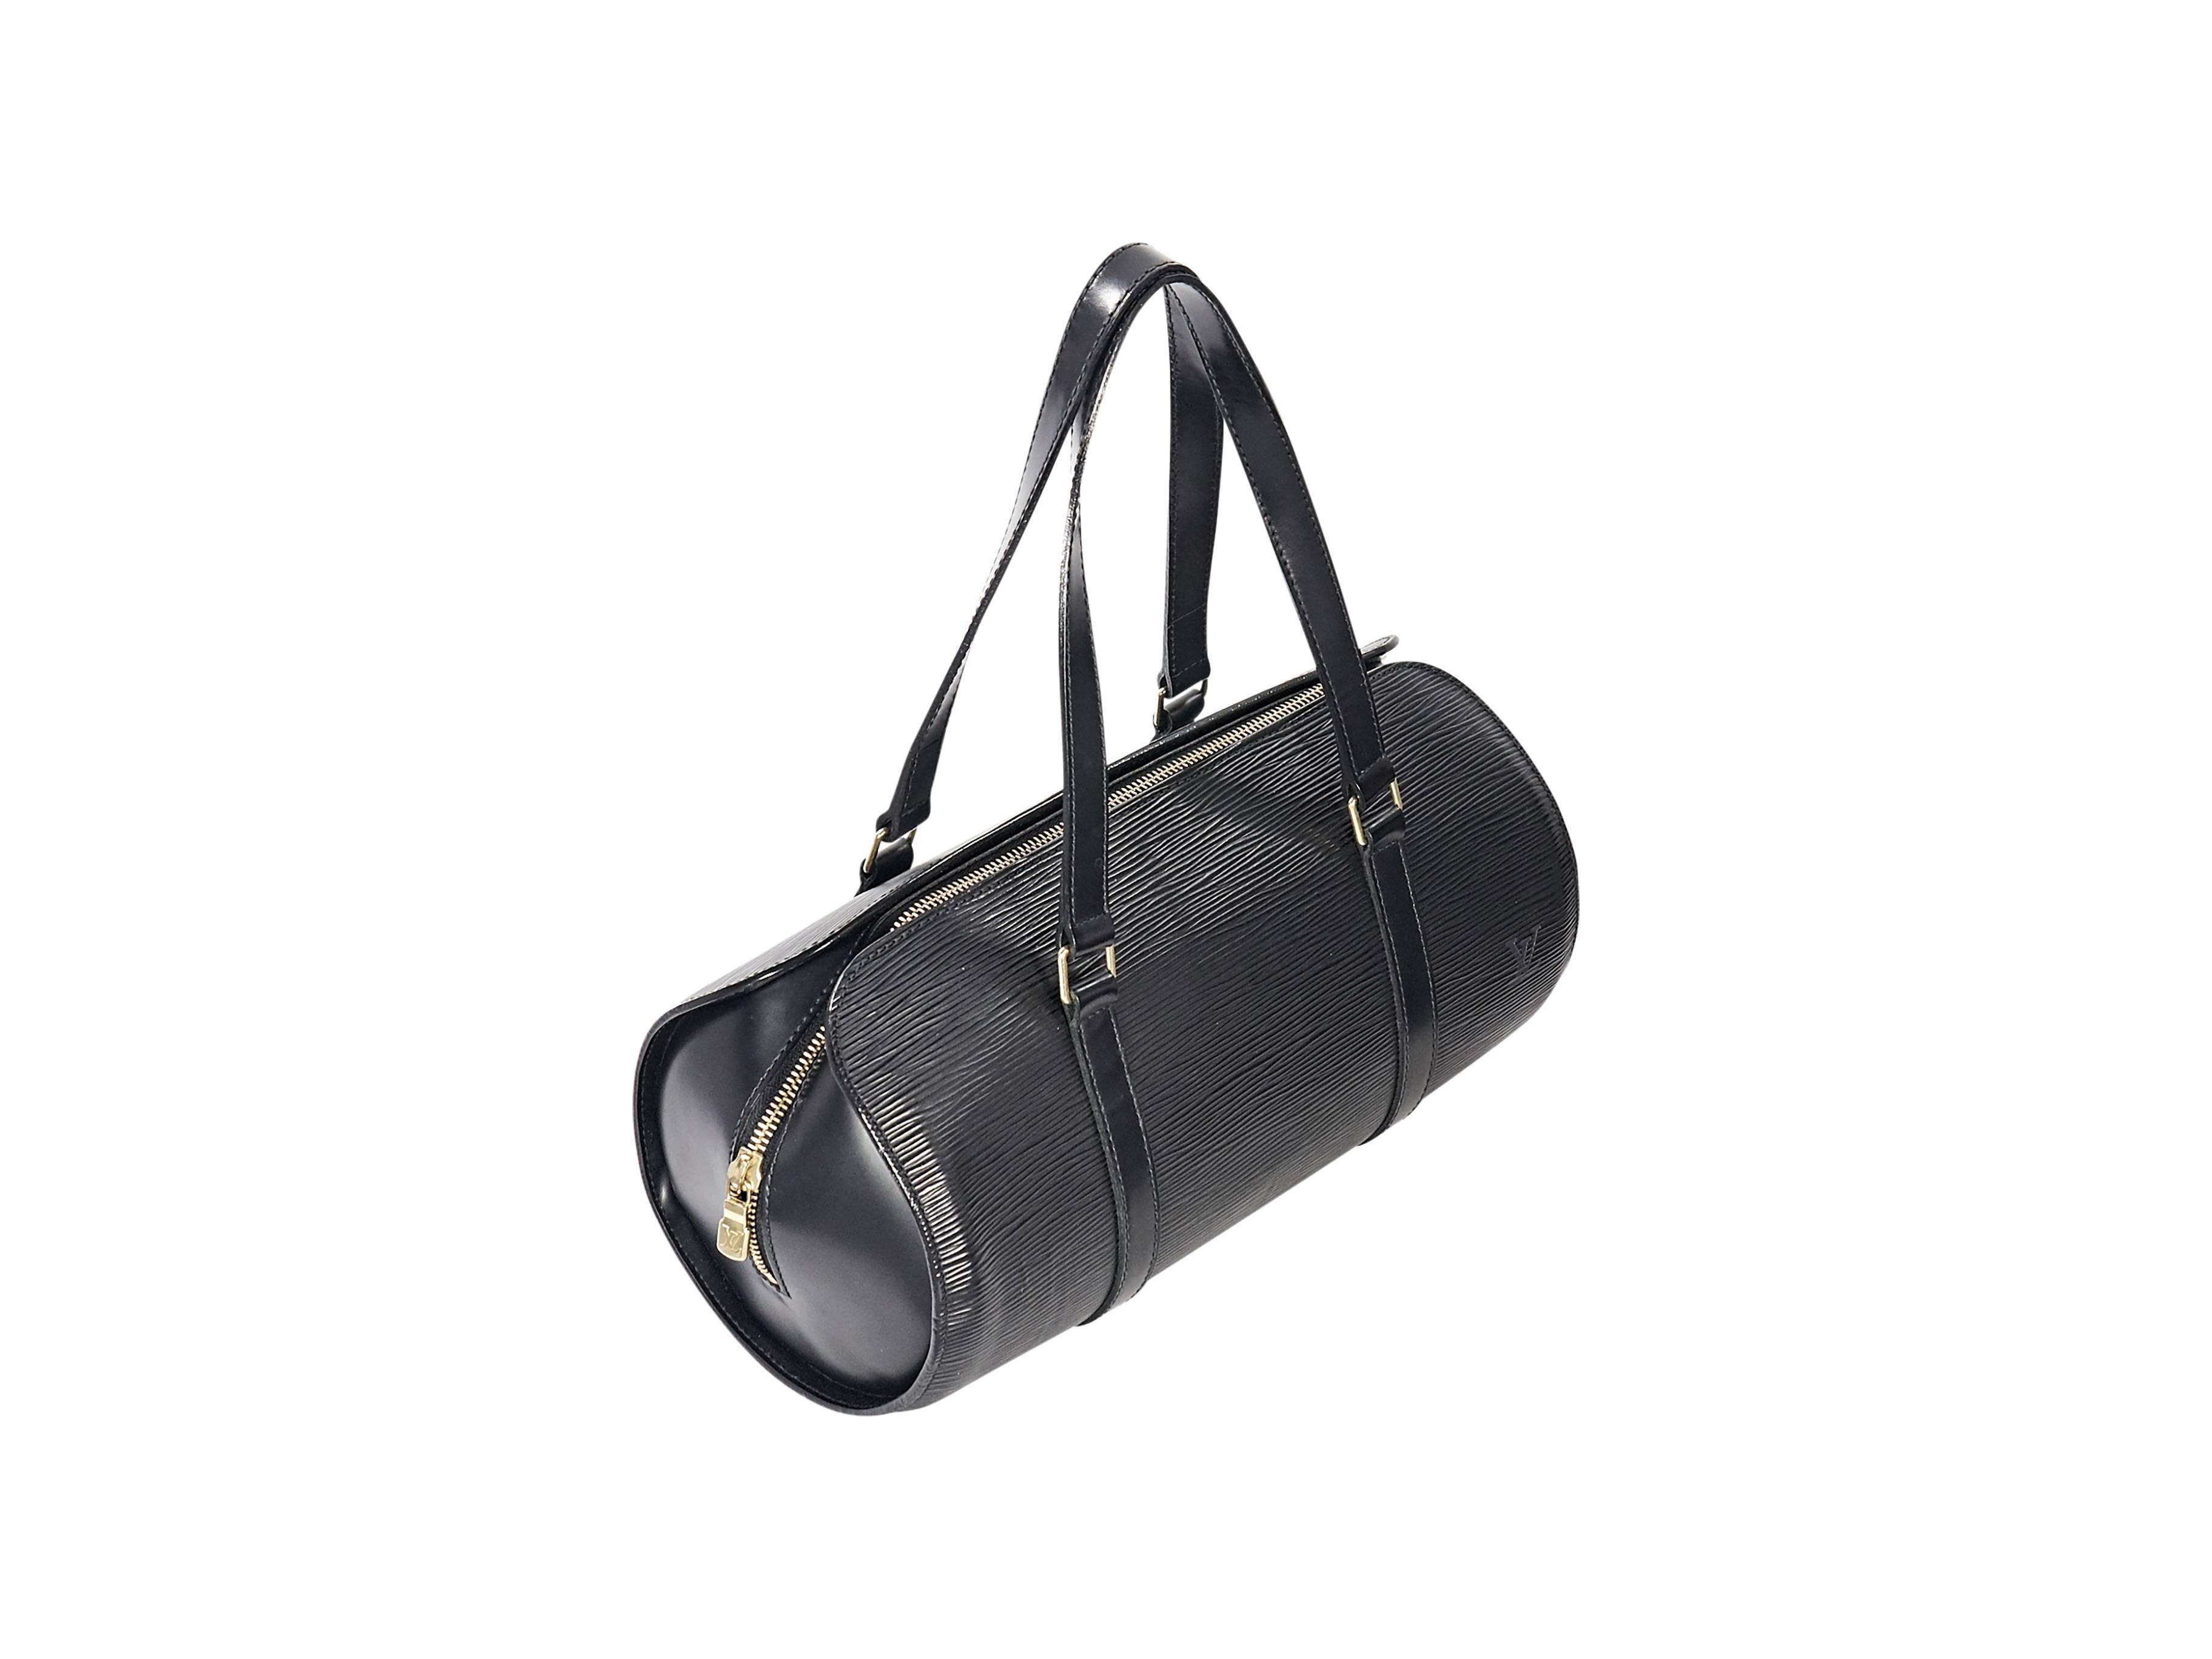 Product details:  Black epi leather Soufflot bag by Louis Vuitton.  Dual shoulder straps.  Top zip closure.  Lined interior with inner slide pocket and attached mini zip pouch.  Goldtone hardware.  12